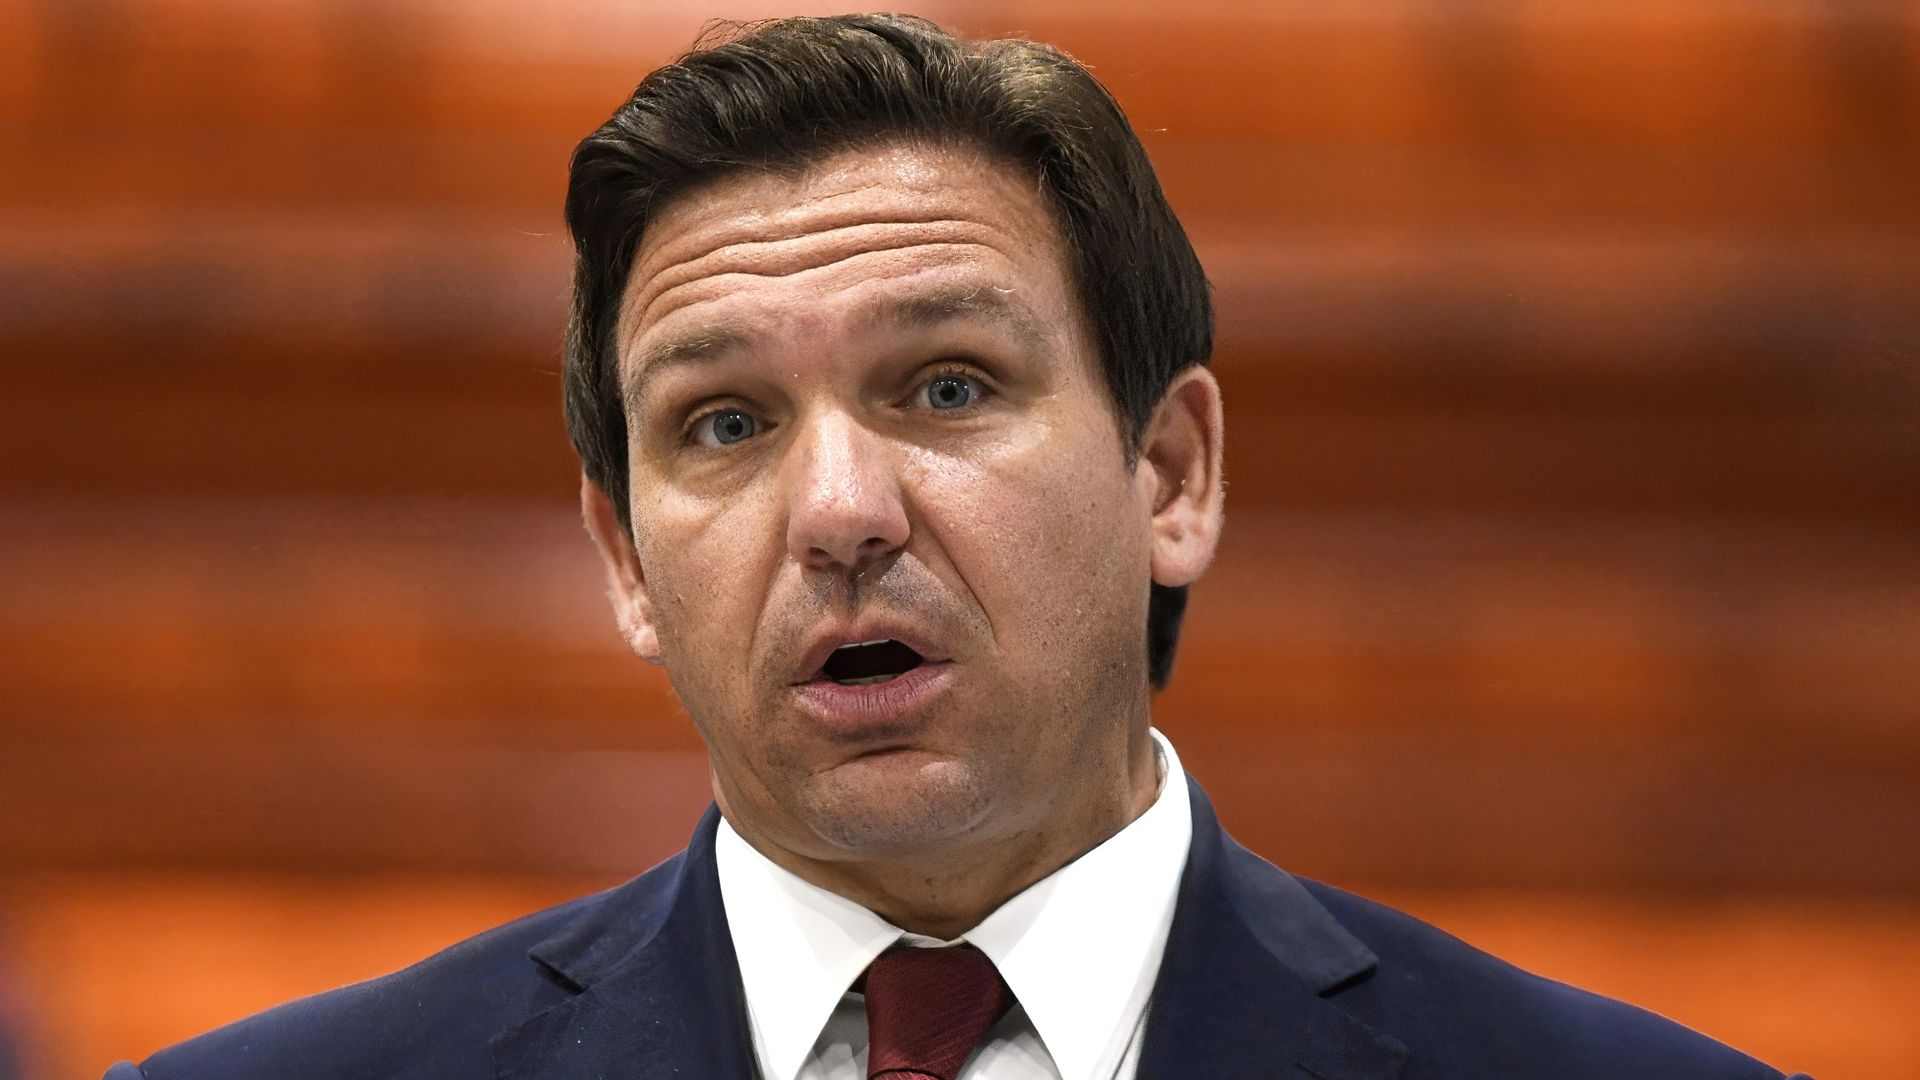 Ron DeSantis stands in a suit while talking